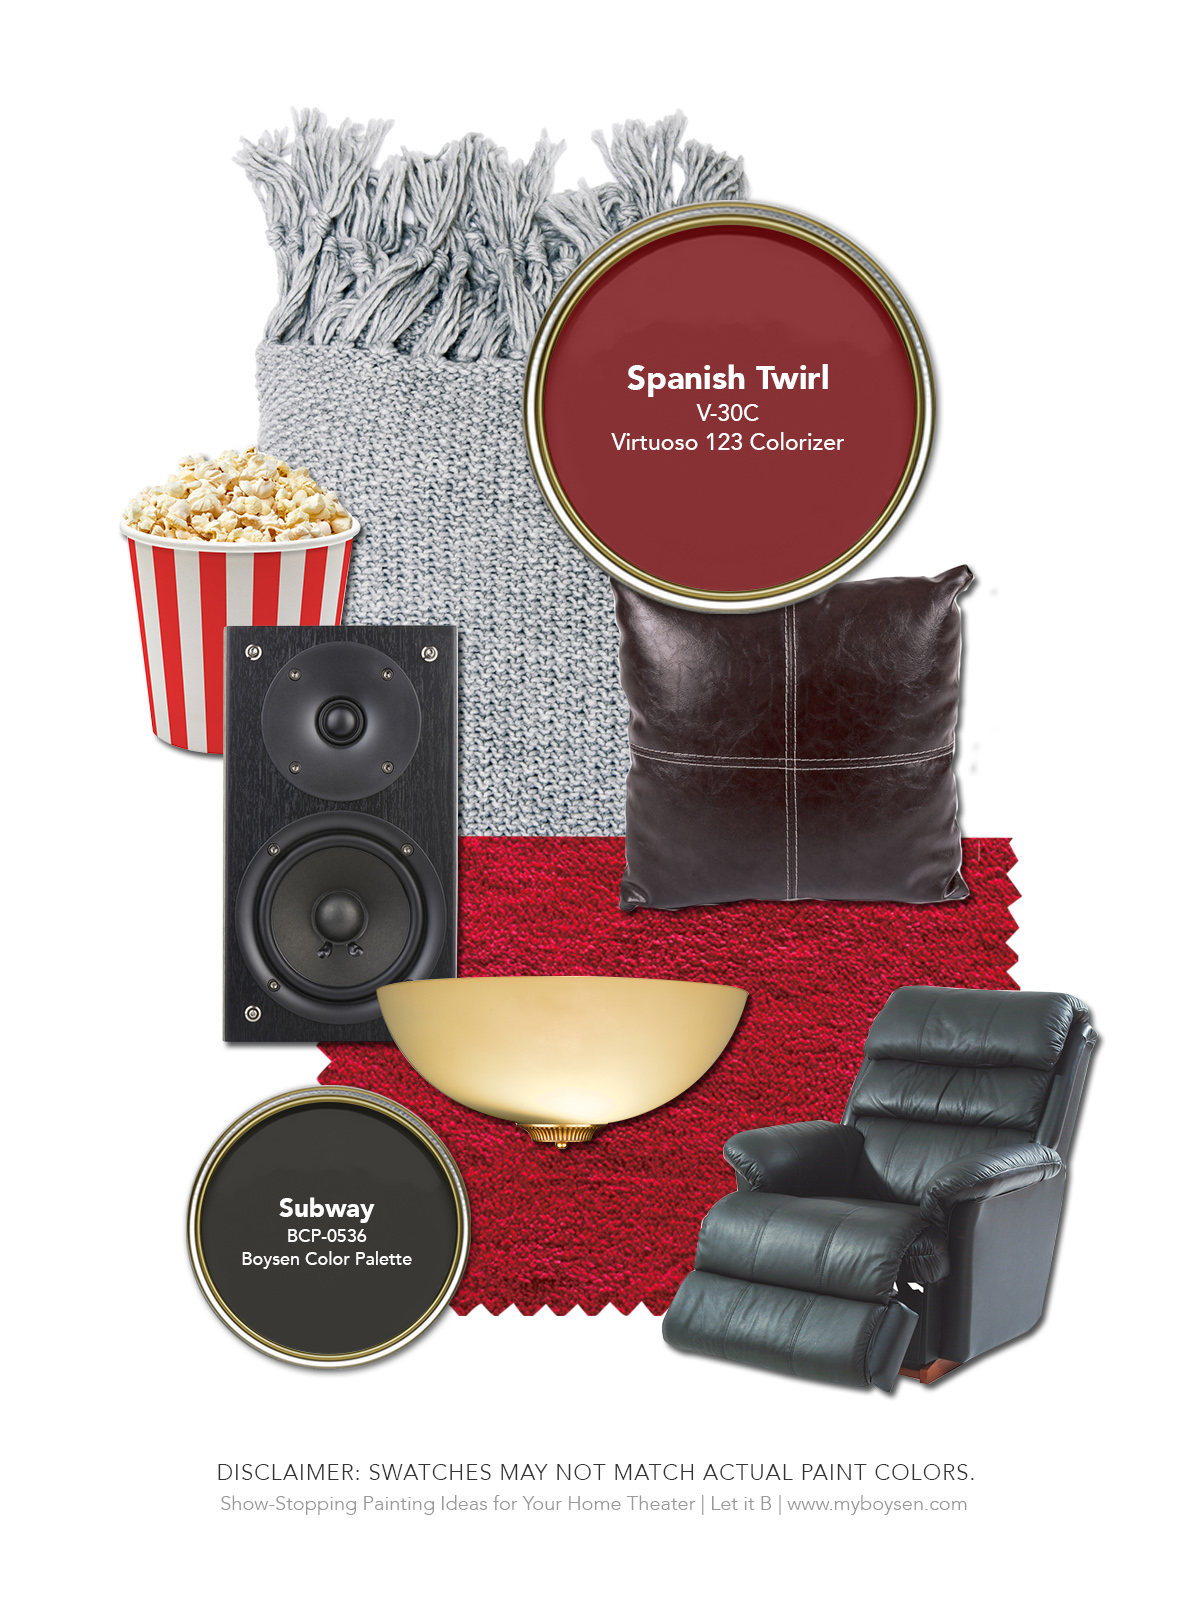 Show-Stopping Painting Ideas for Your Home Theater | MyBoysen